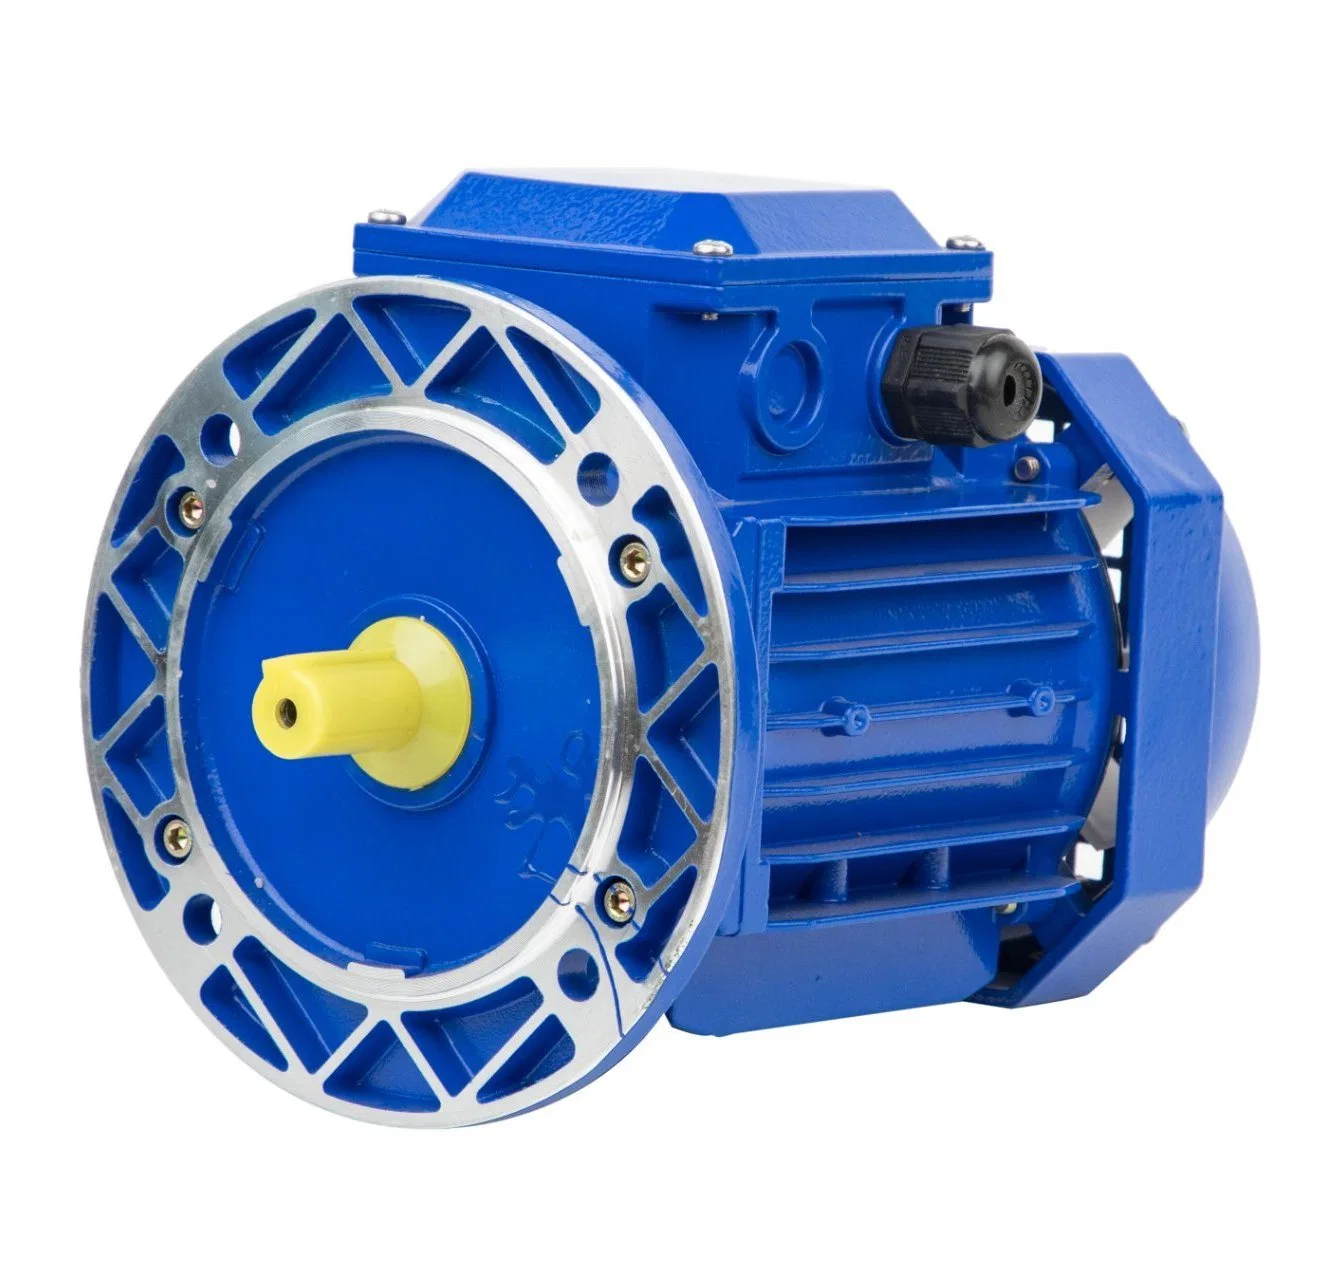 Popular Model Three Phase Ie2 Ie3 AC Electric Motors From Chinese Factory